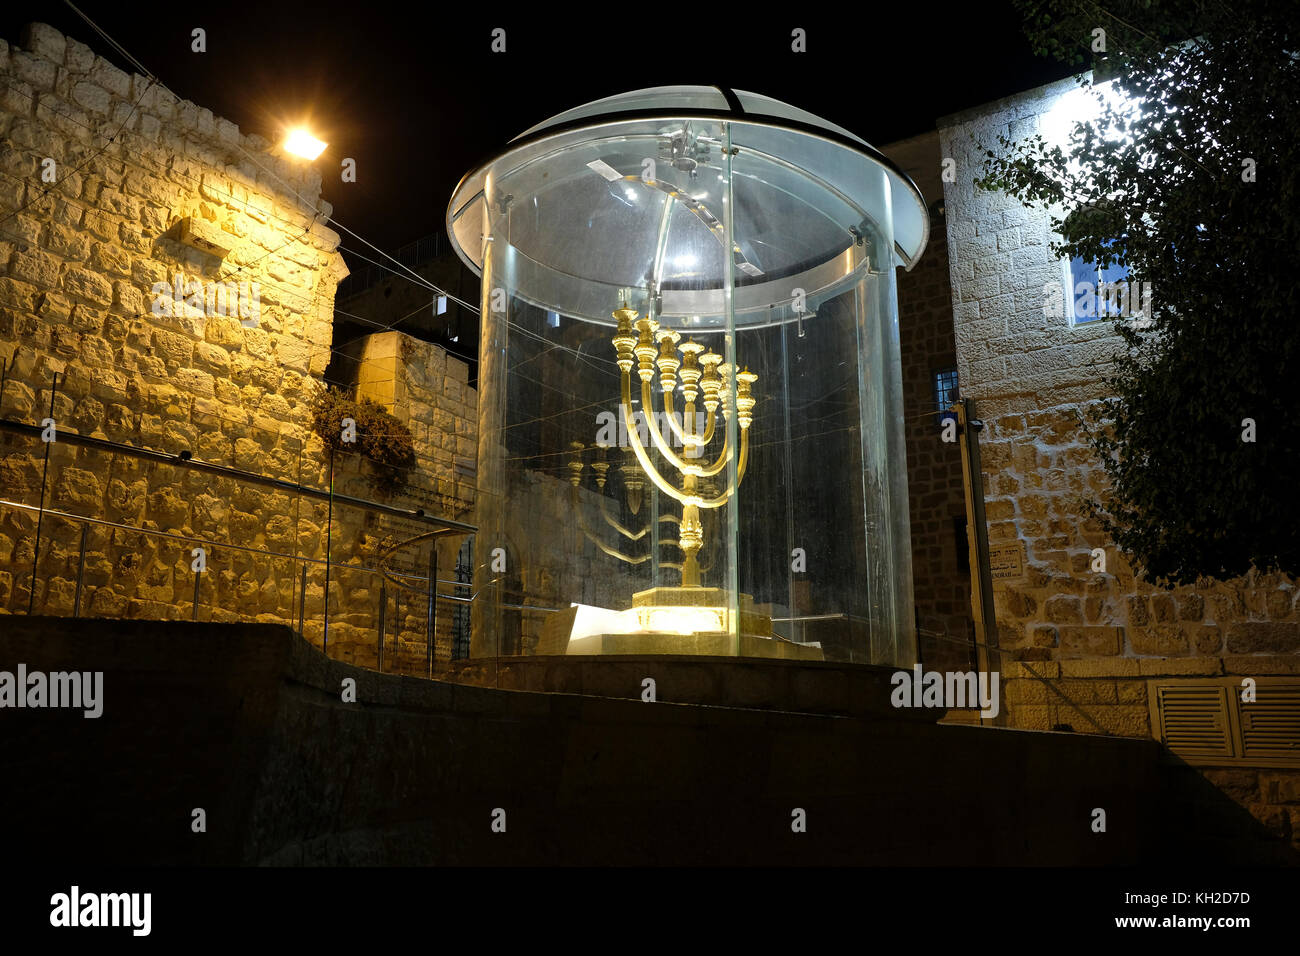 Goldhar Hot Water Urn - The Federation of Synagogues